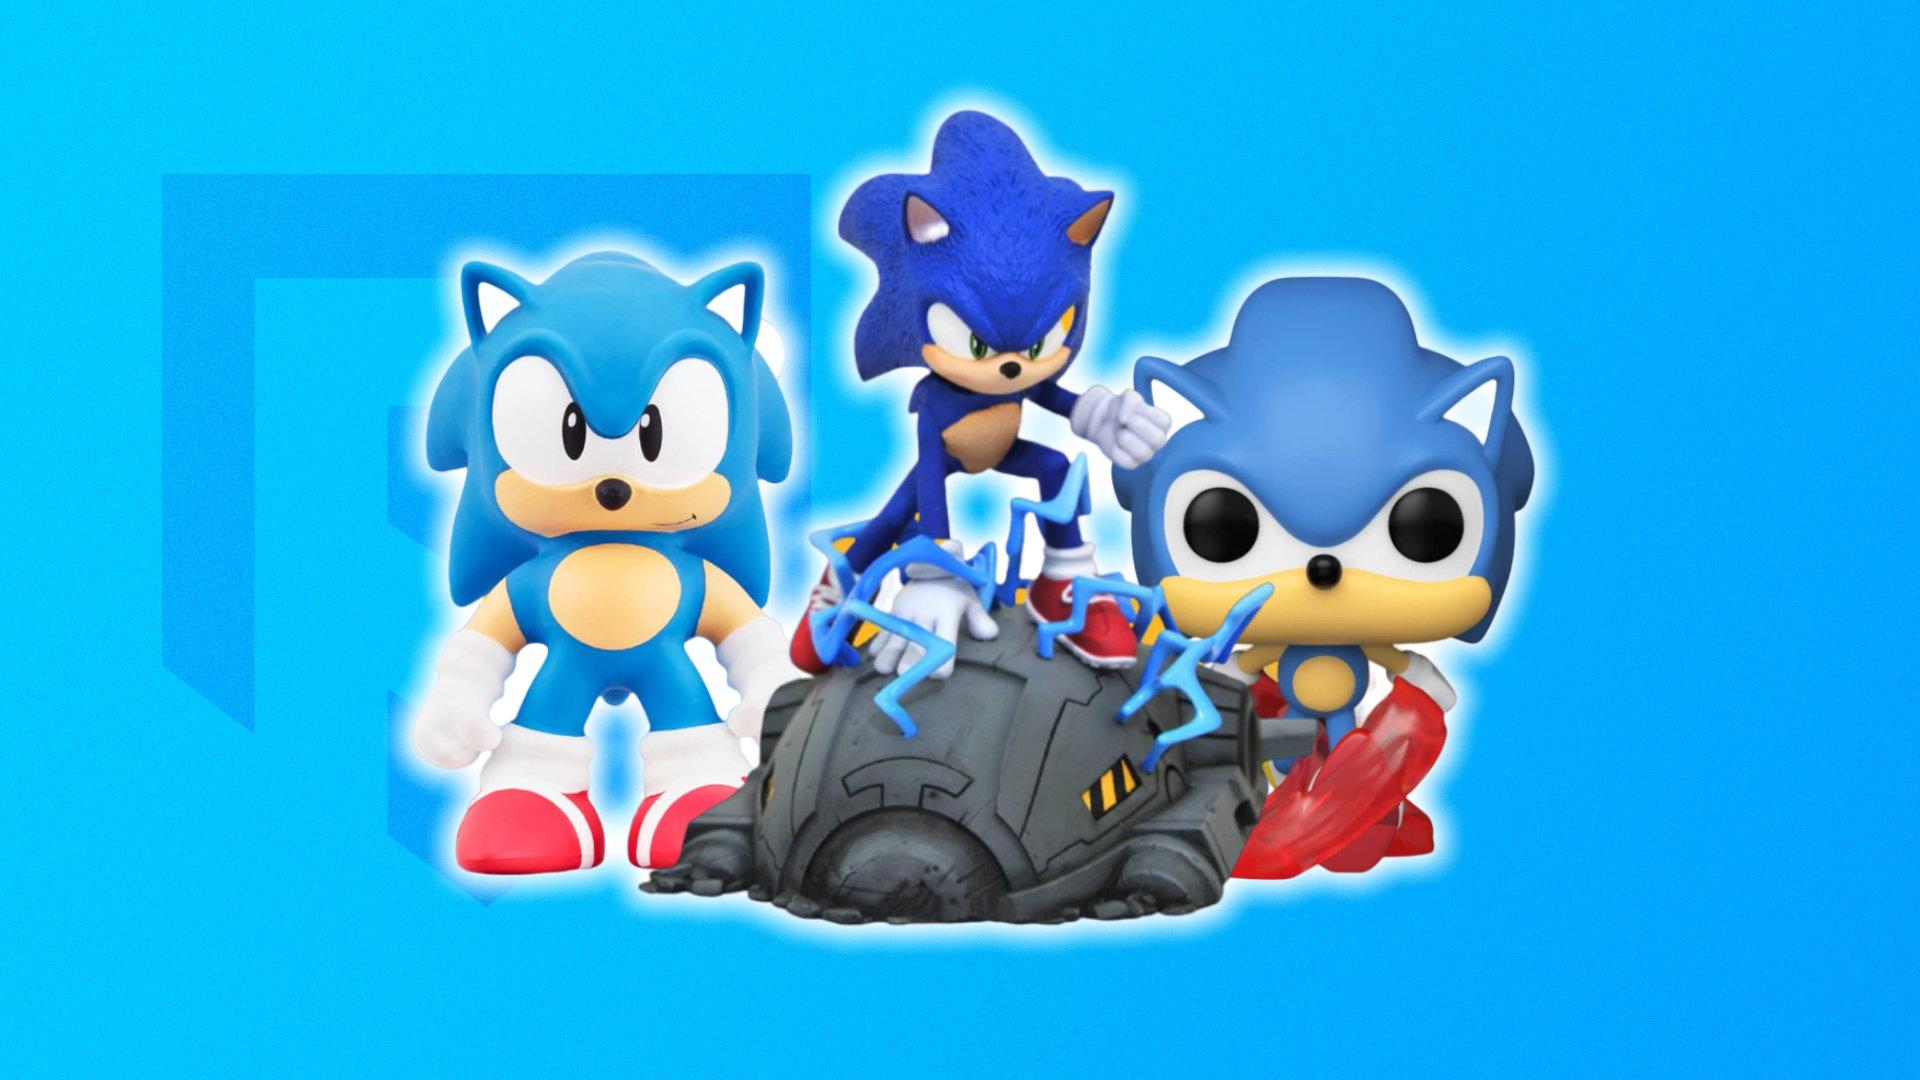 A look at the new Sonic the Hedgehog minifigures